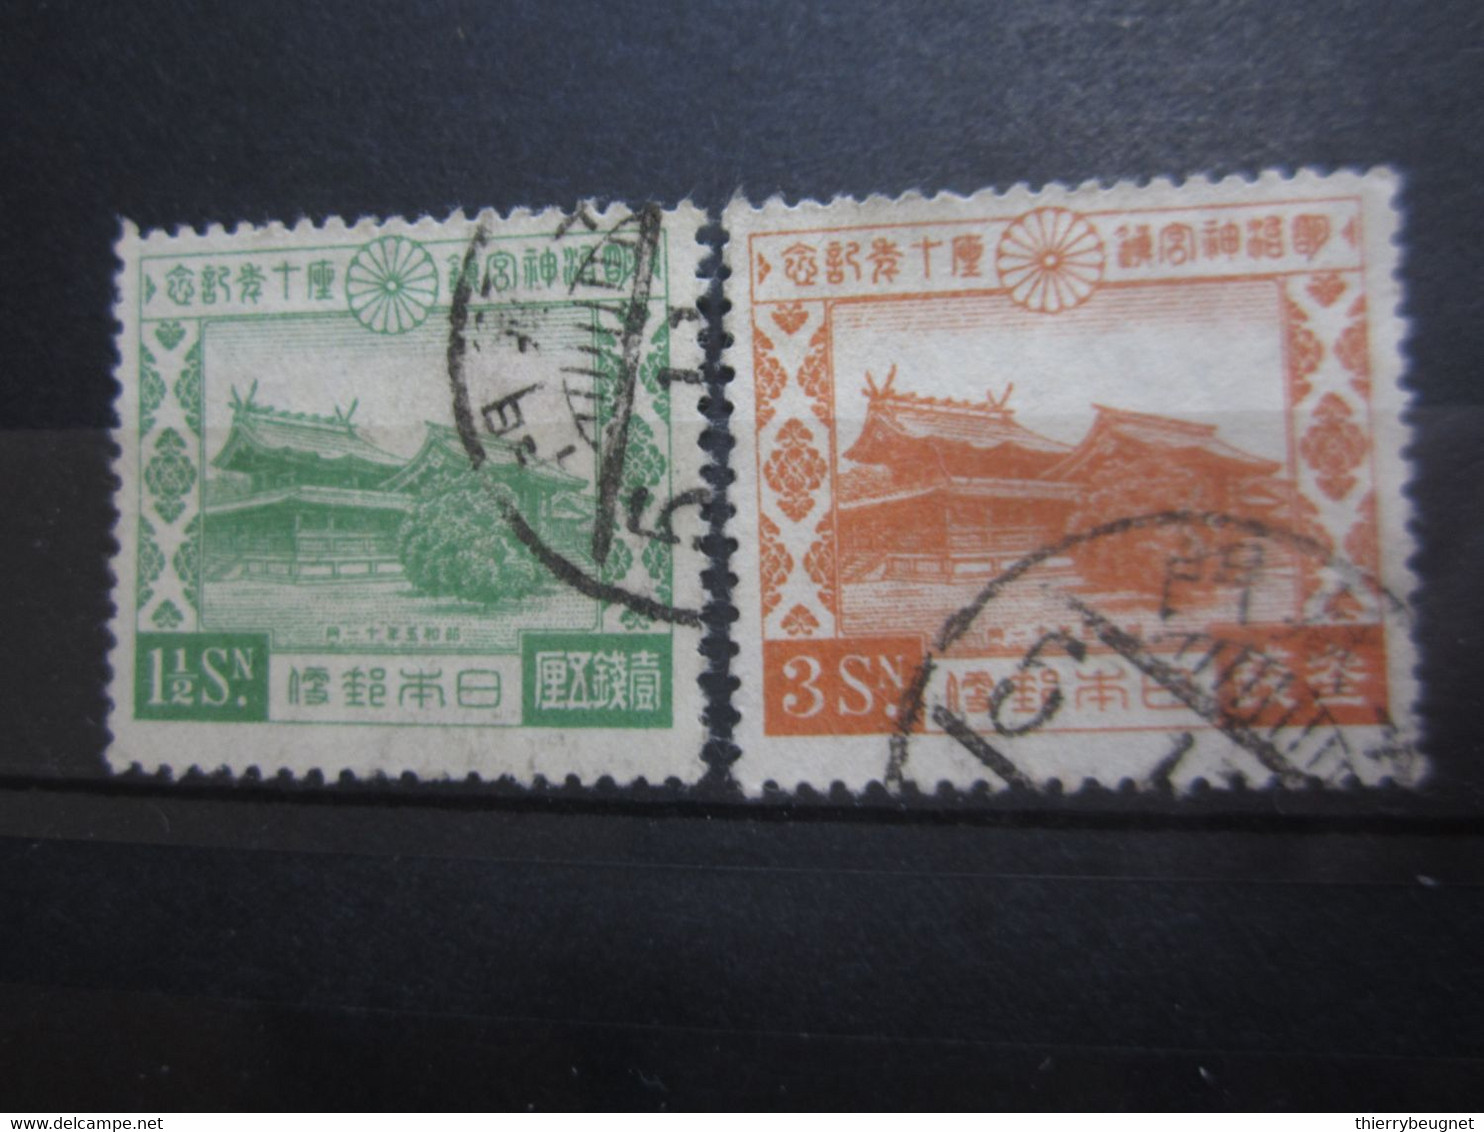 VEND BEAUX TIMBRES DU JAPON N° 215 + 216 !!! - Used Stamps